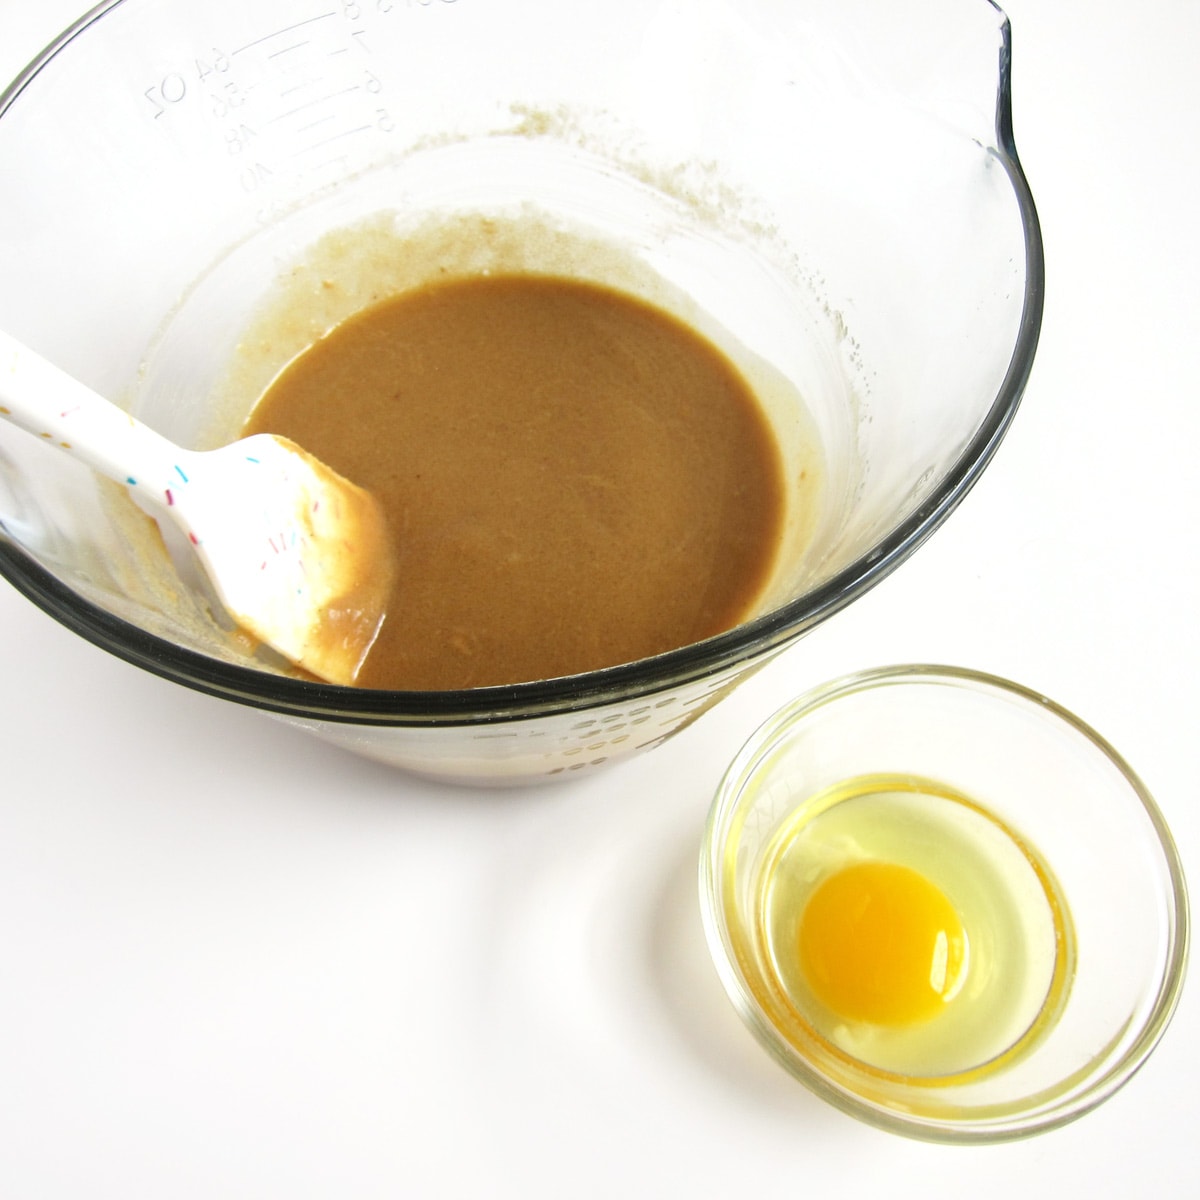 Mixing bowl with melted butter, peanut butter, brown sugar, and granulated sugar mixed together next to a ramekin with a cracked egg.